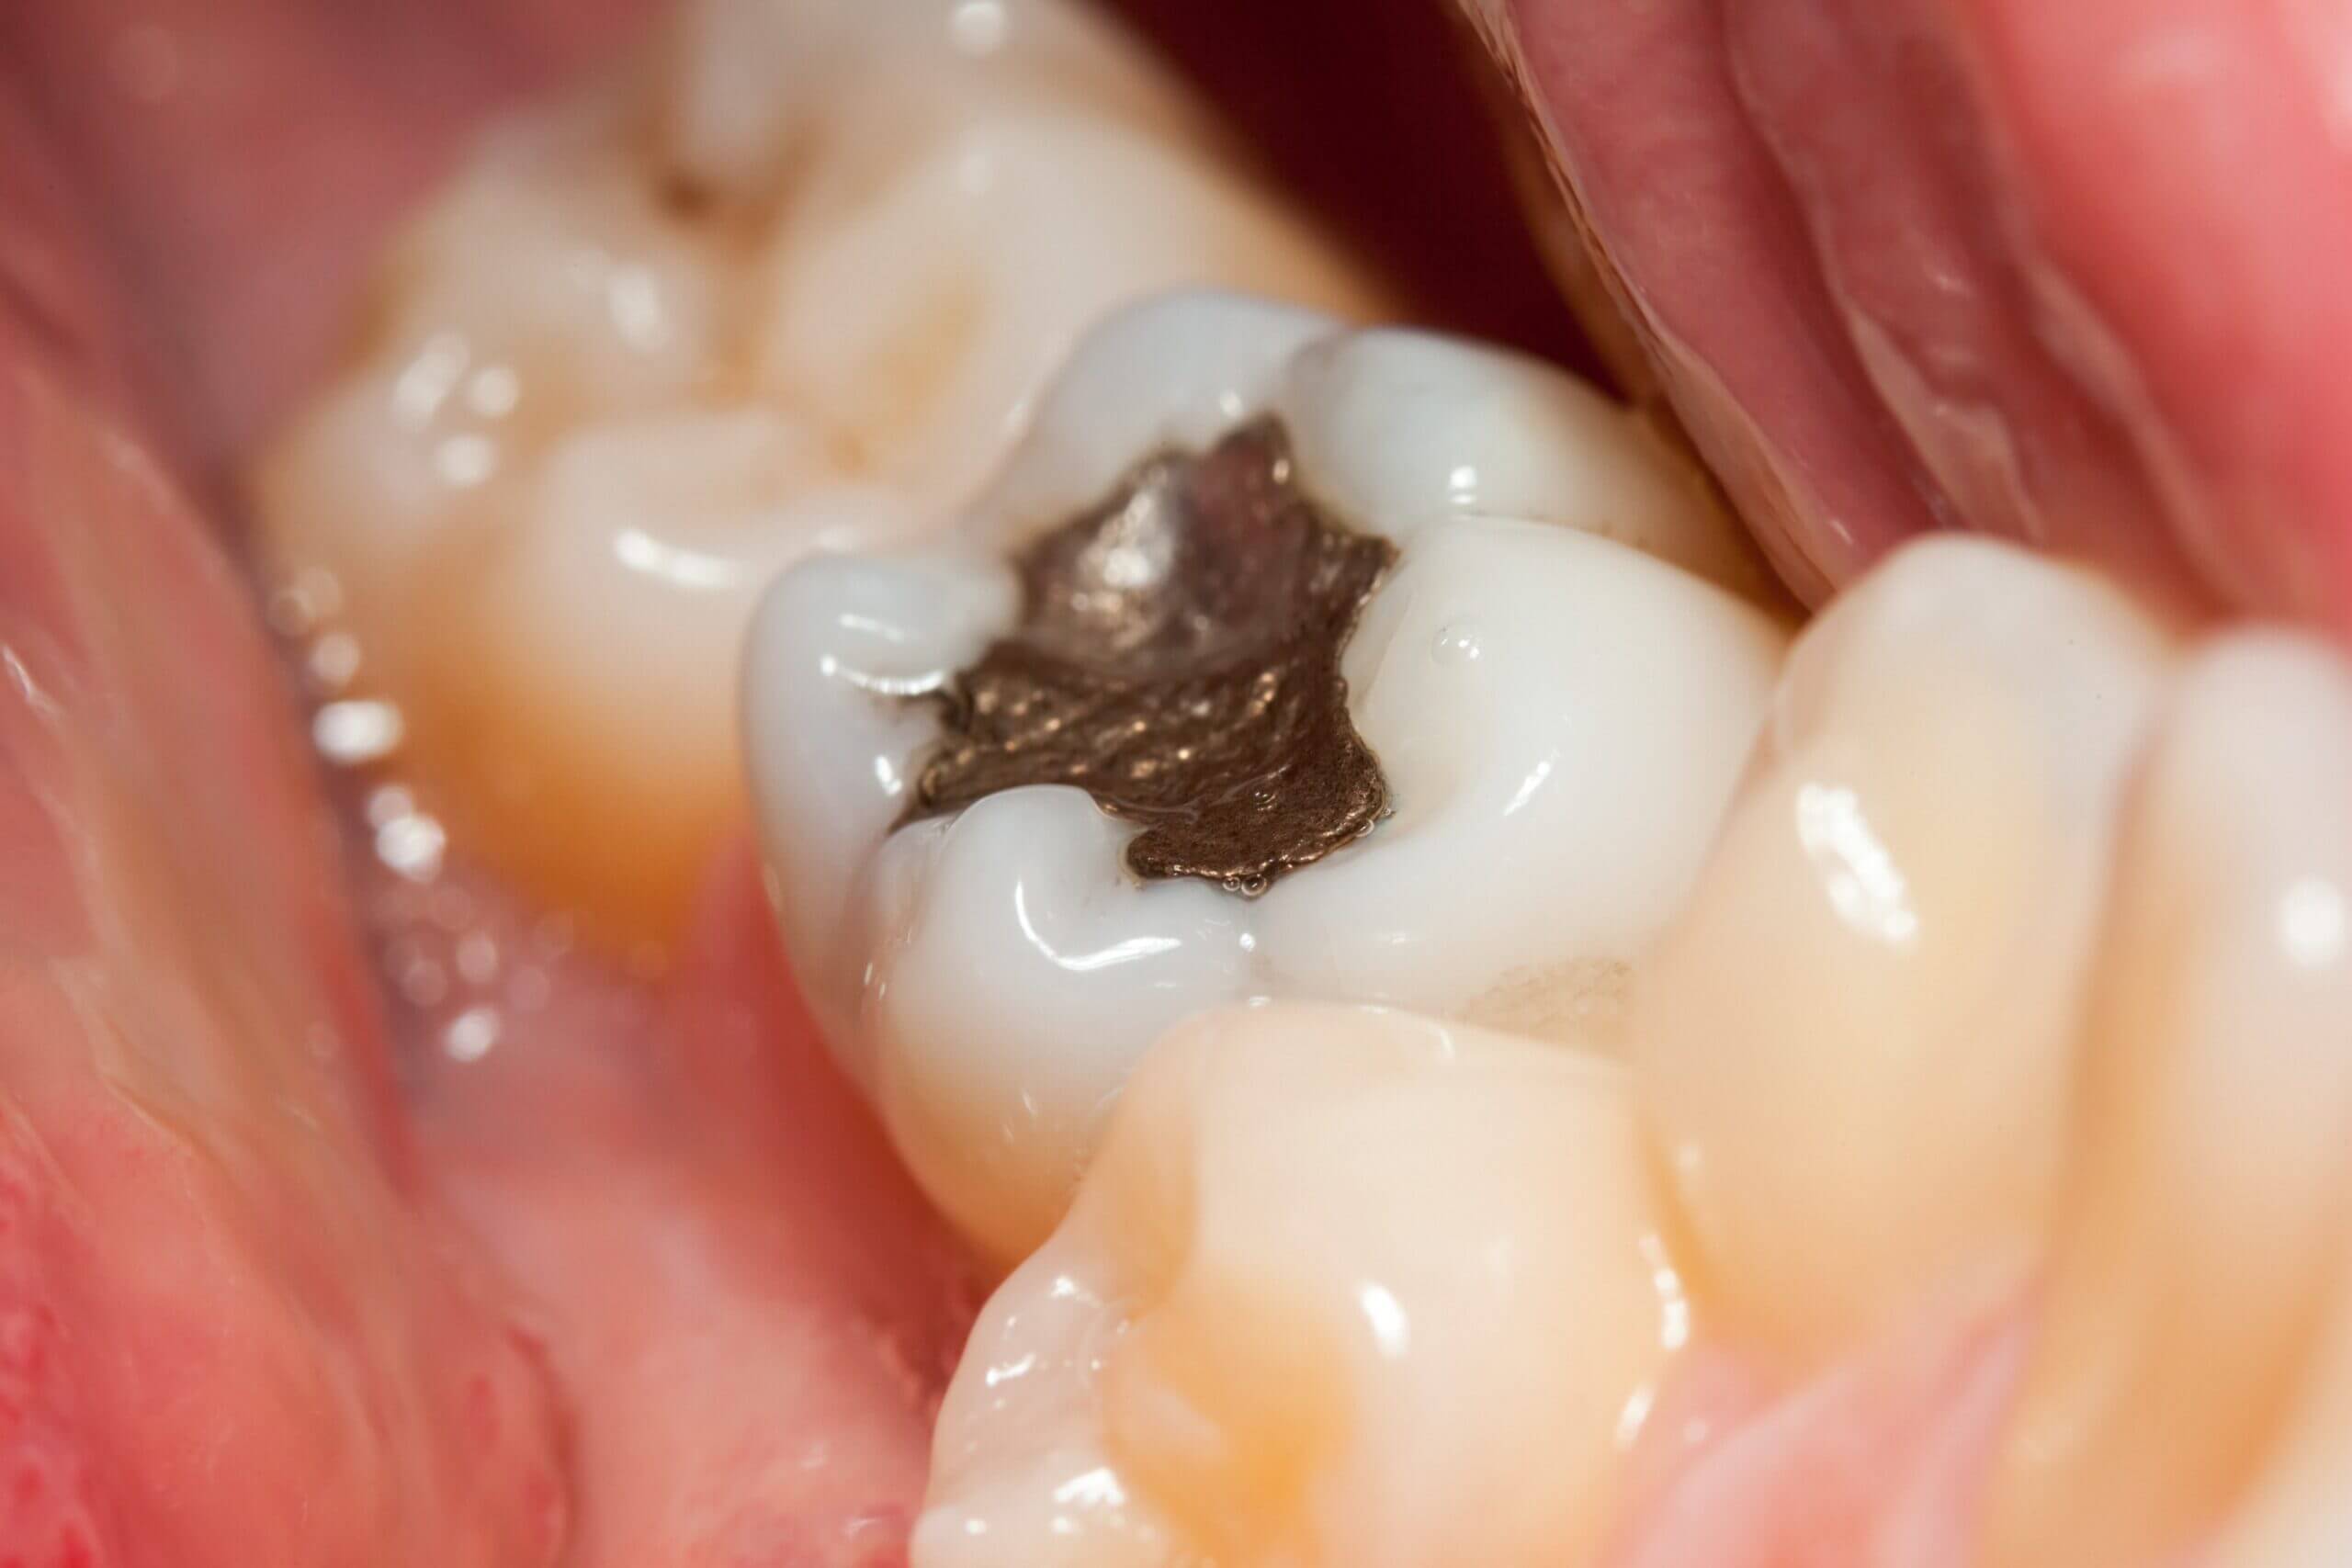 The cause of pain in a filled tooth